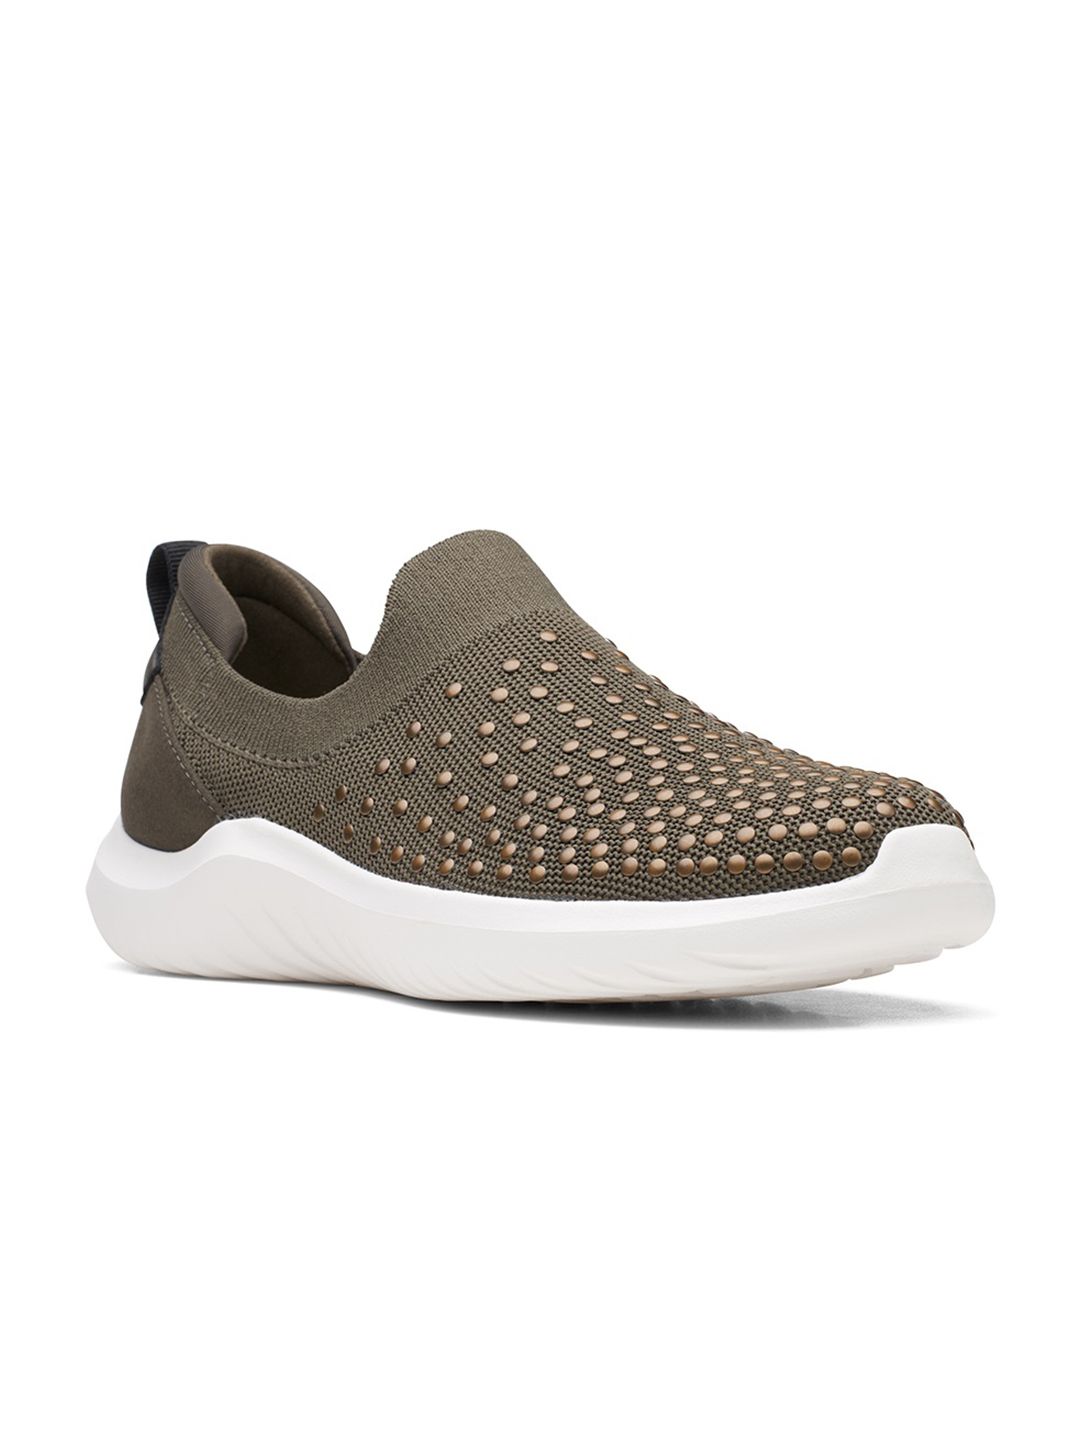 Clarks Women Olive Green Woven Design Slip-On Sneakers Price in India